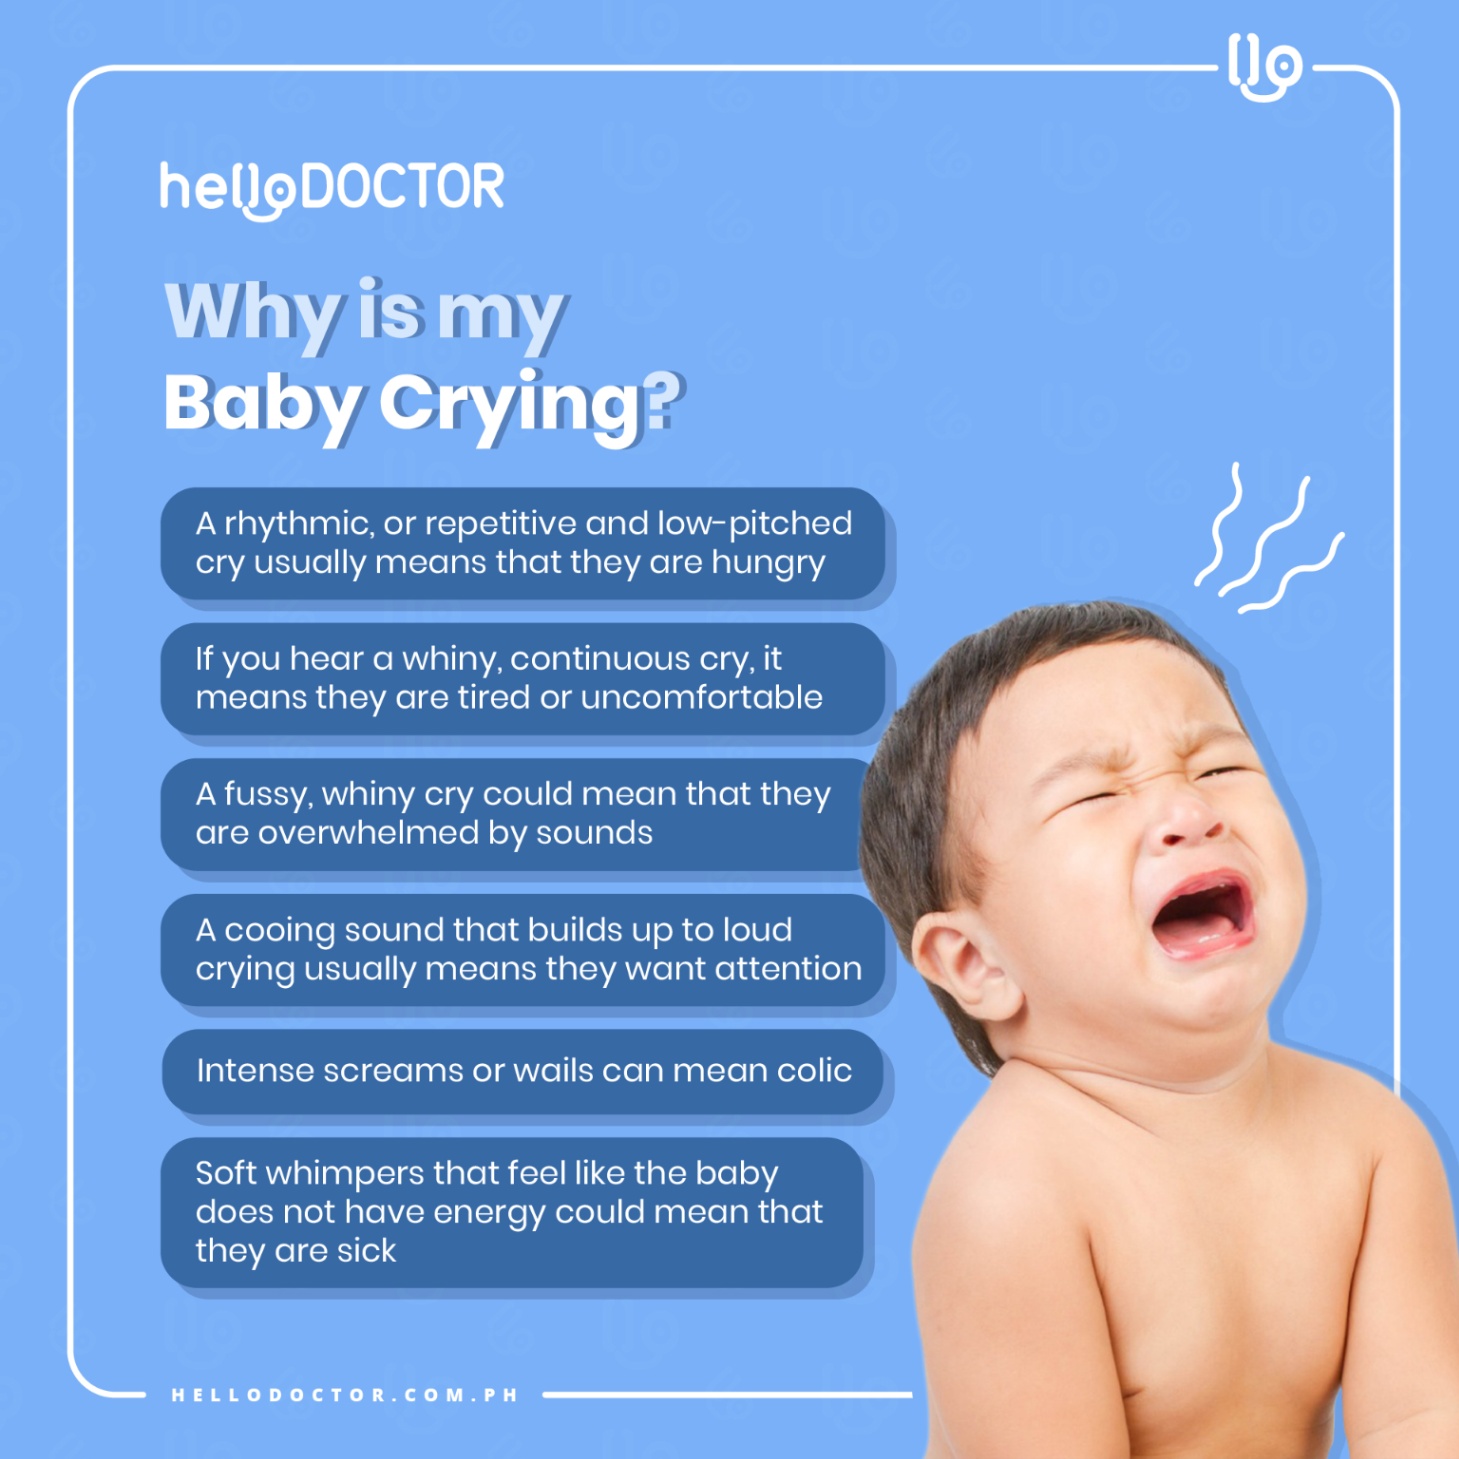 Why is Baby Crying? 